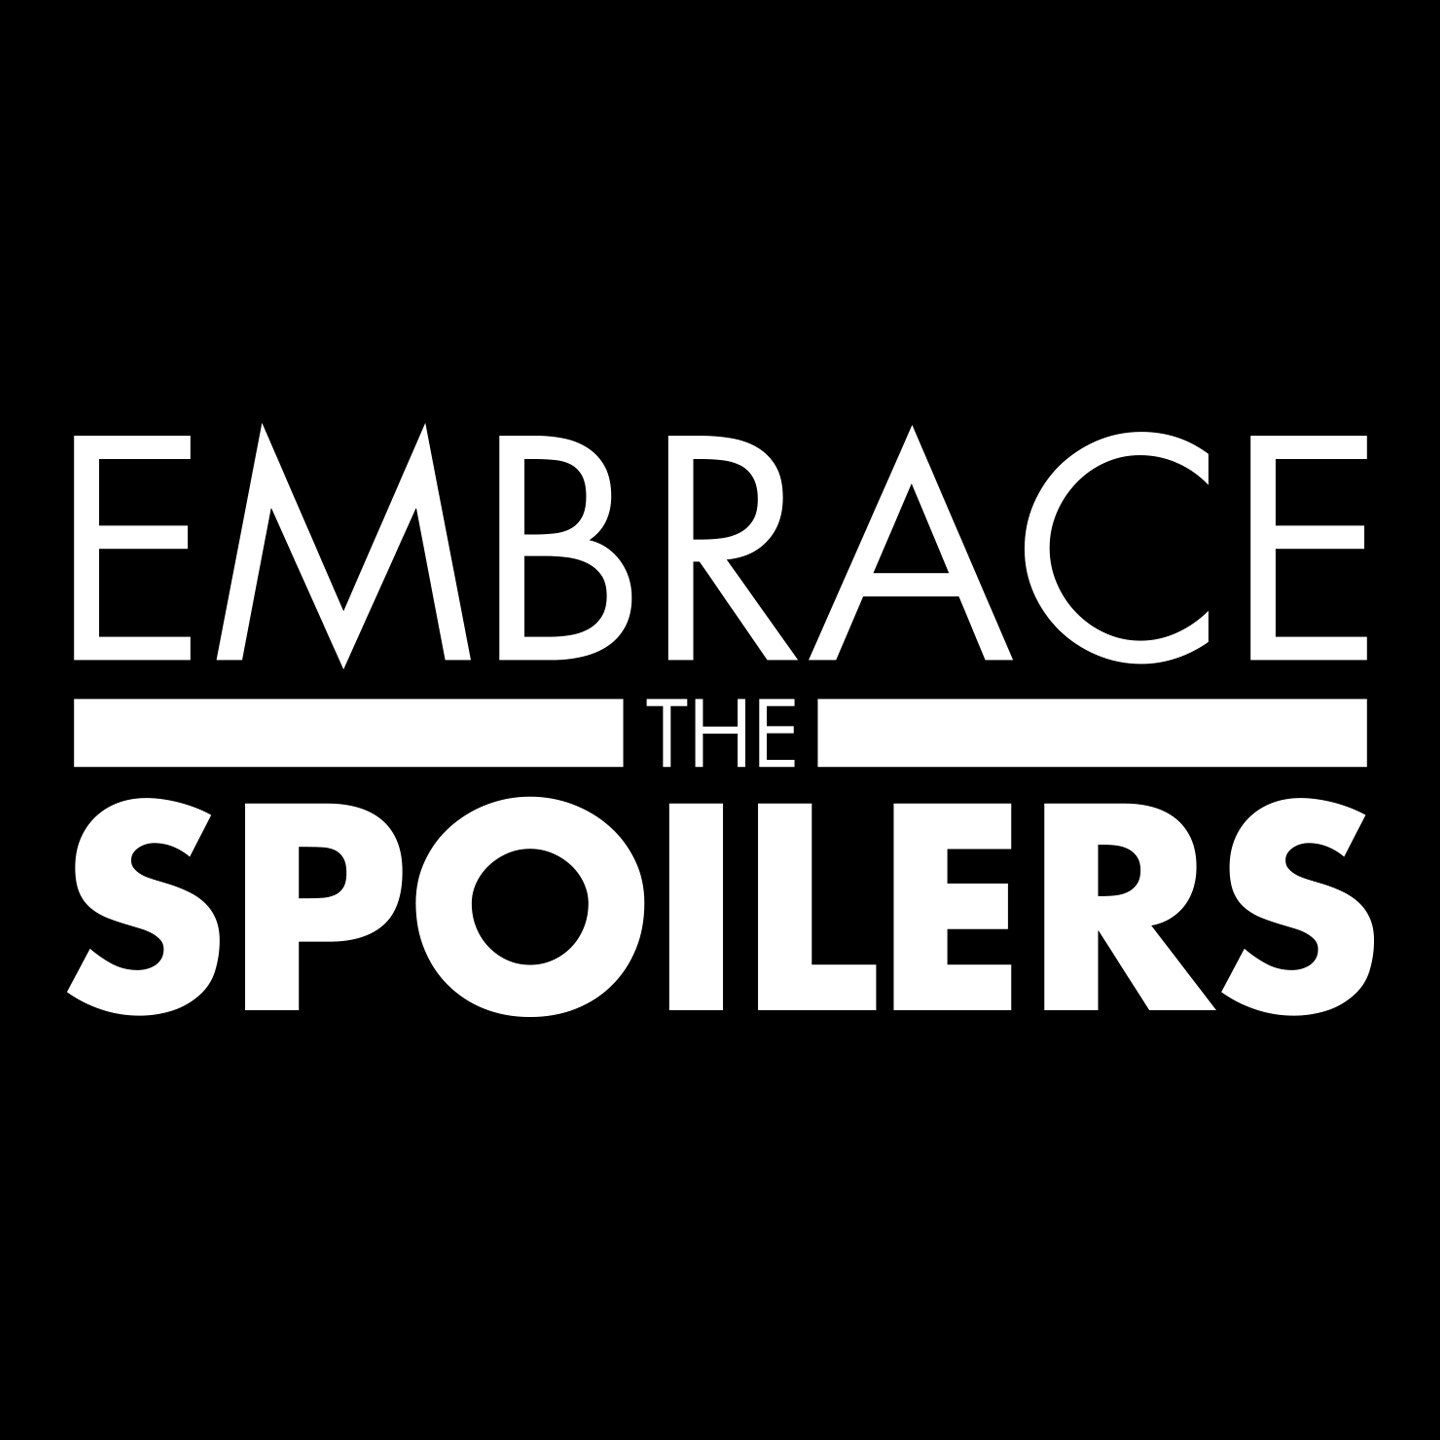 Embrace the Spoilers - Inside Out